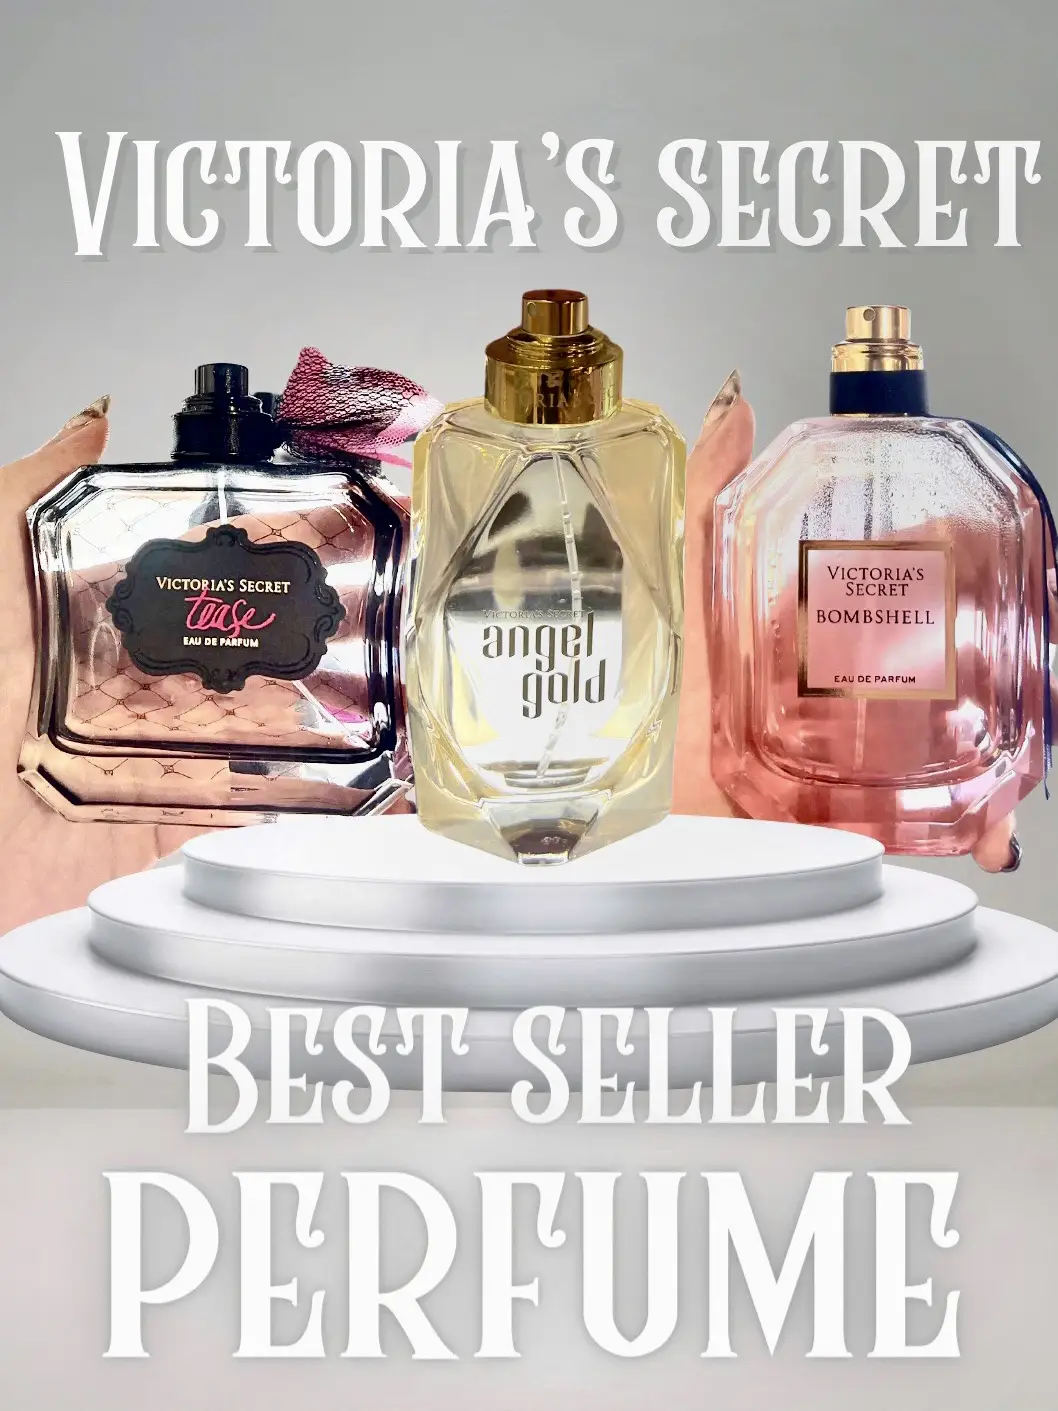 Free tote bag with an $85 purchase & more! @Victoria's Secret